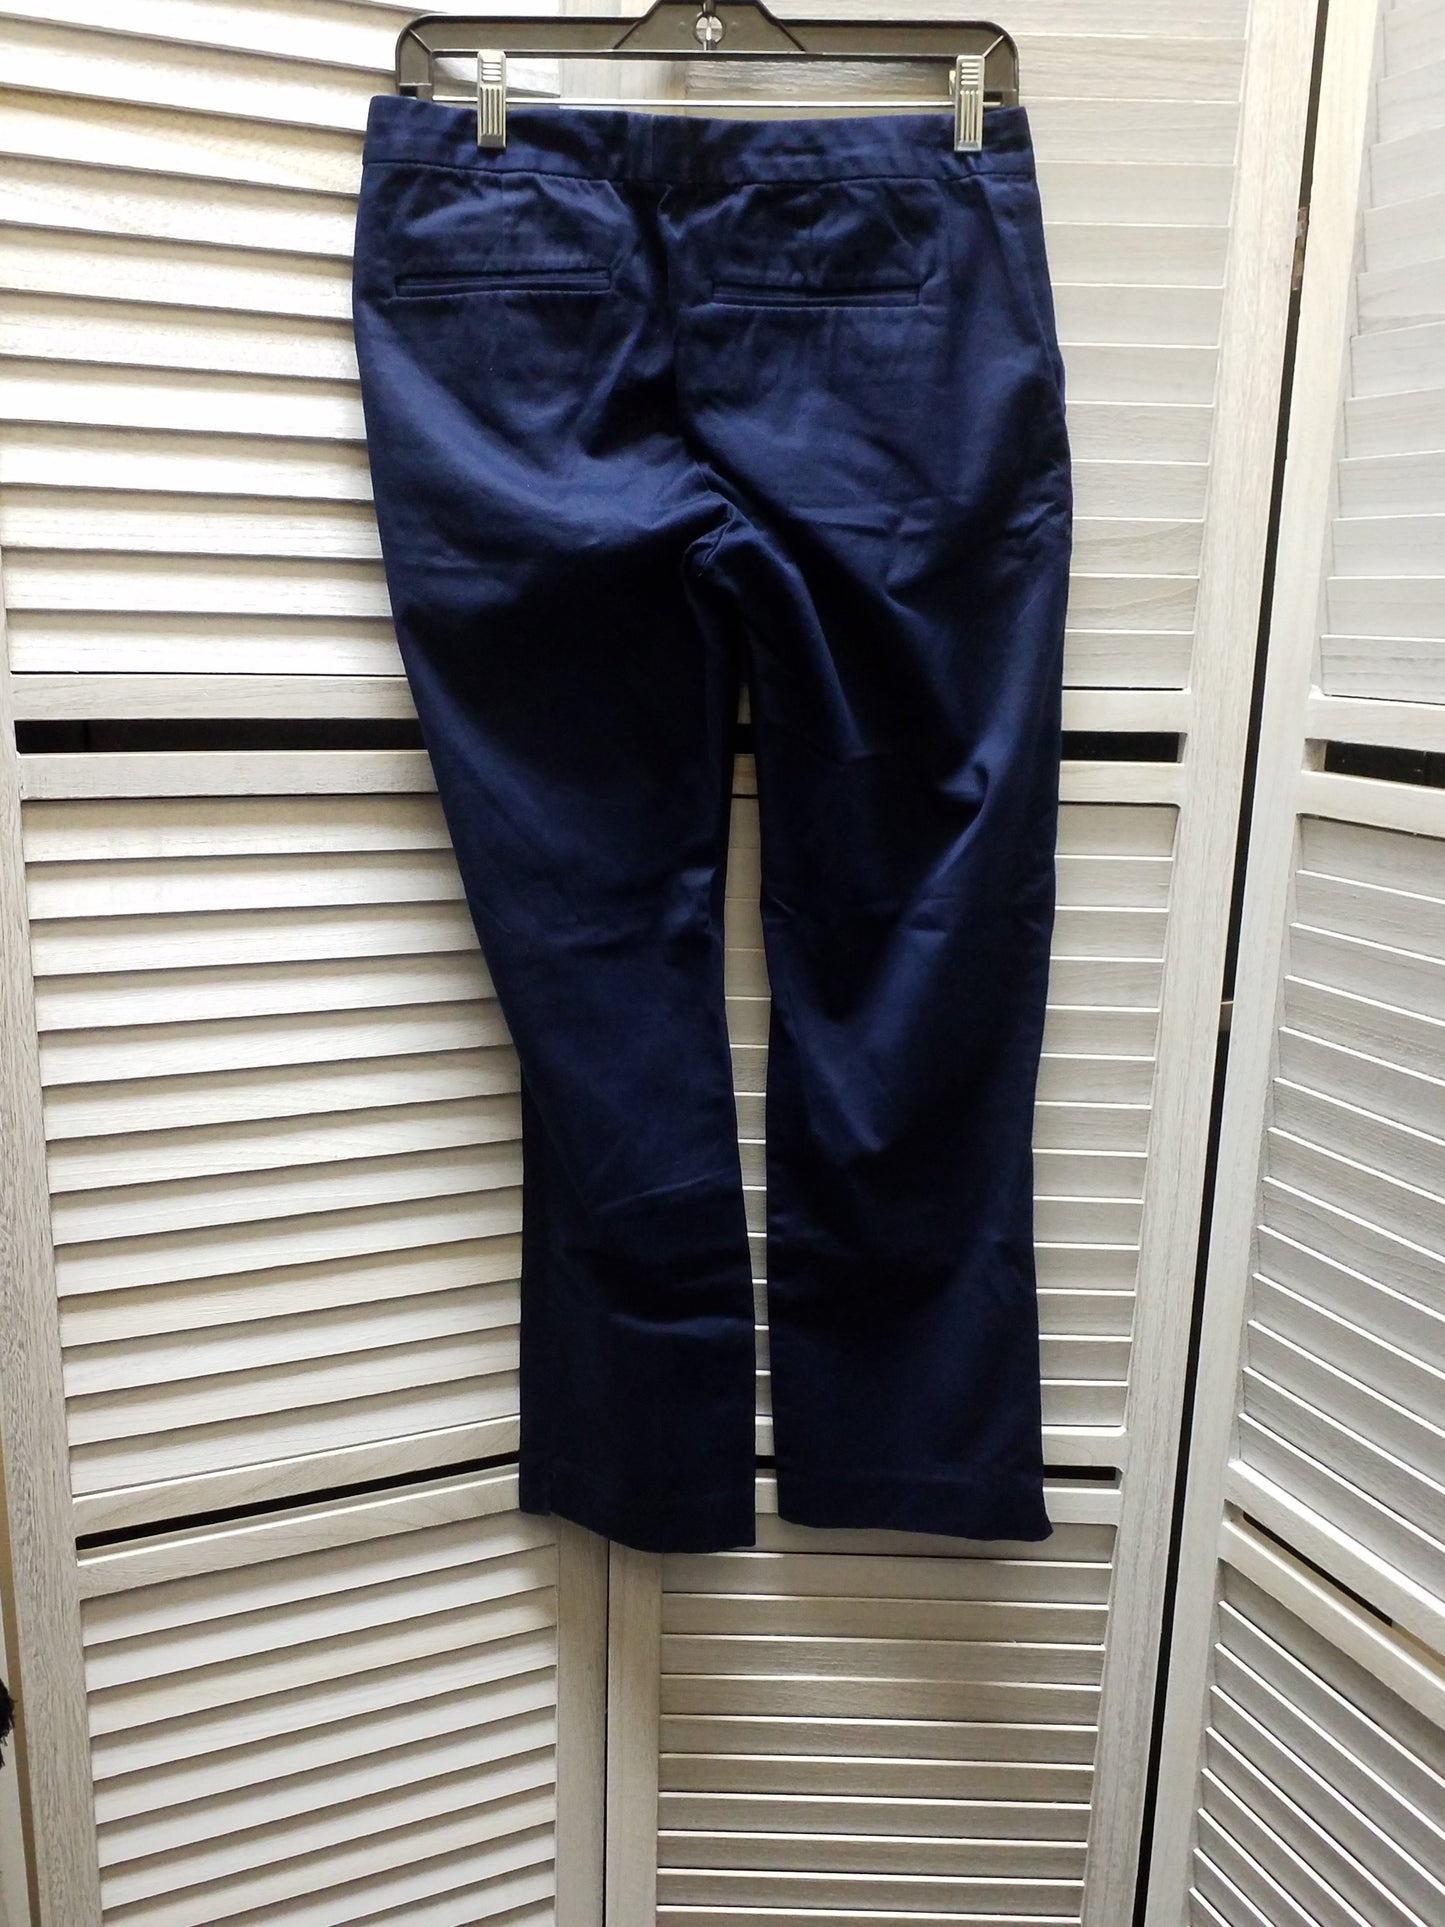 Pants Chinos & Khakis By Lilly Pulitzer  Size: 6